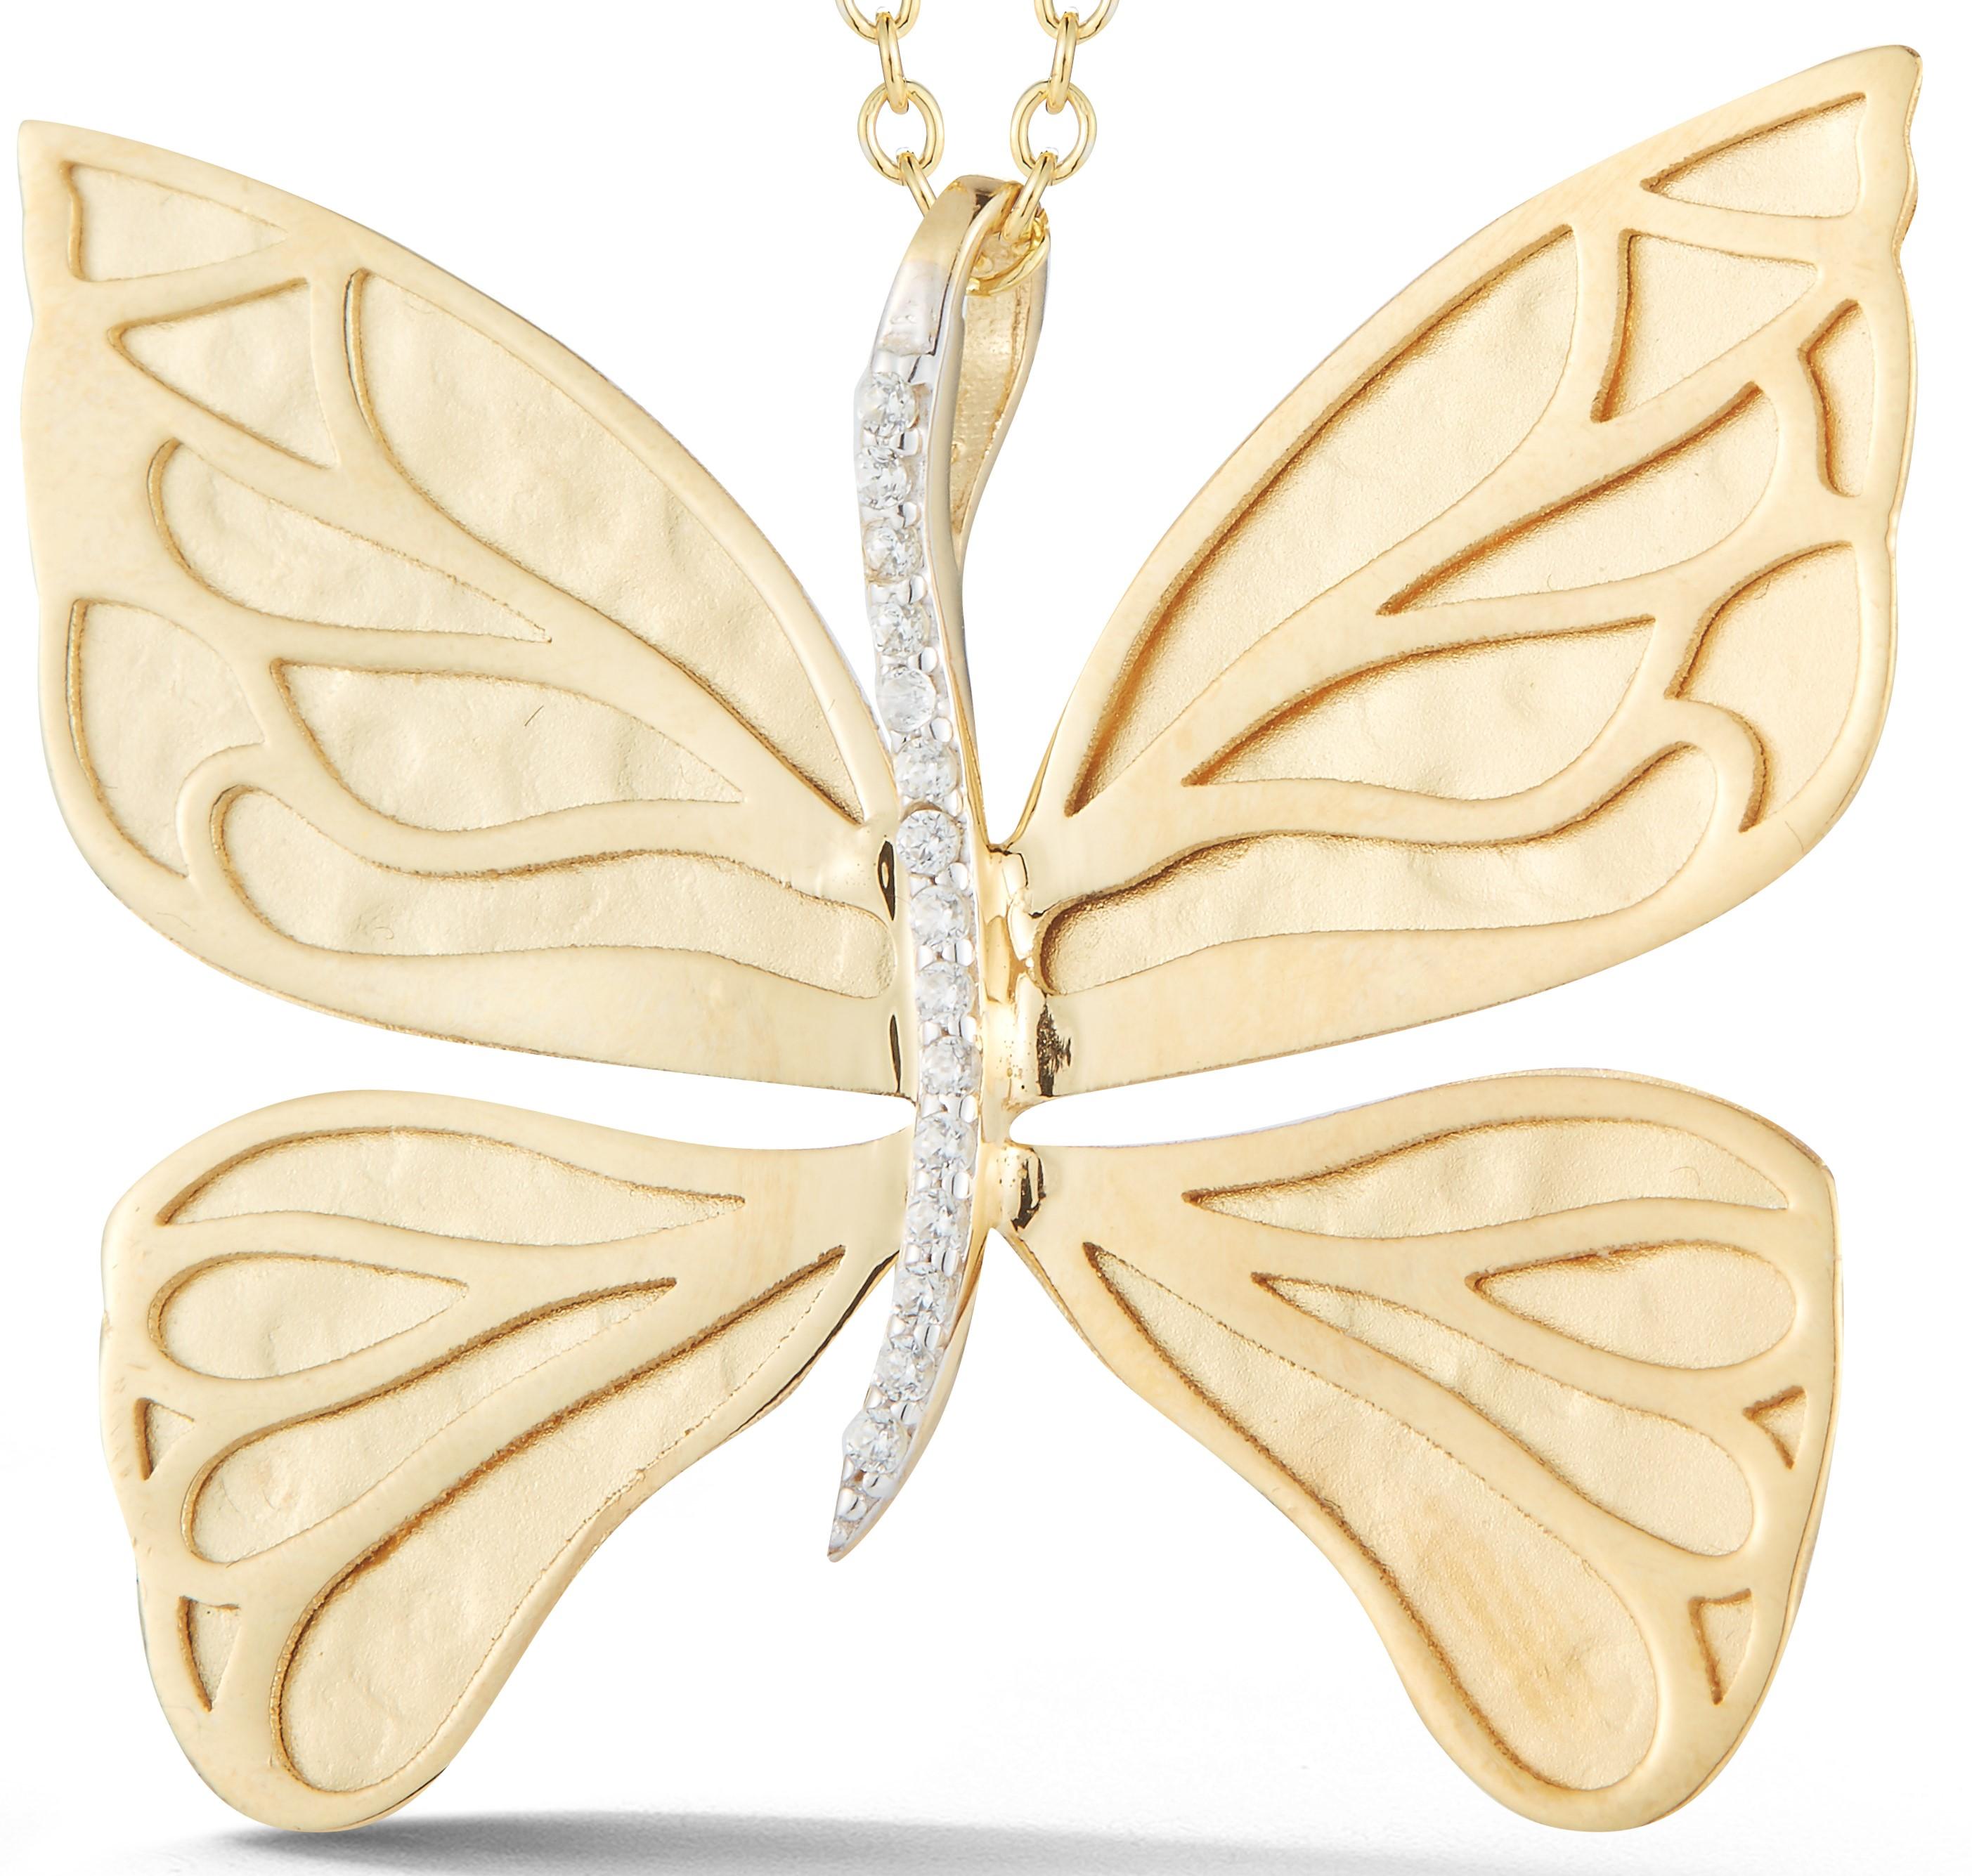 14 Karat Yellow Gold Hand-Crafted Matte and Polish-Finished Butterfly Pendant, Accented with 0.09 Carats of Pave Set Diamonds, Sliding on a 16